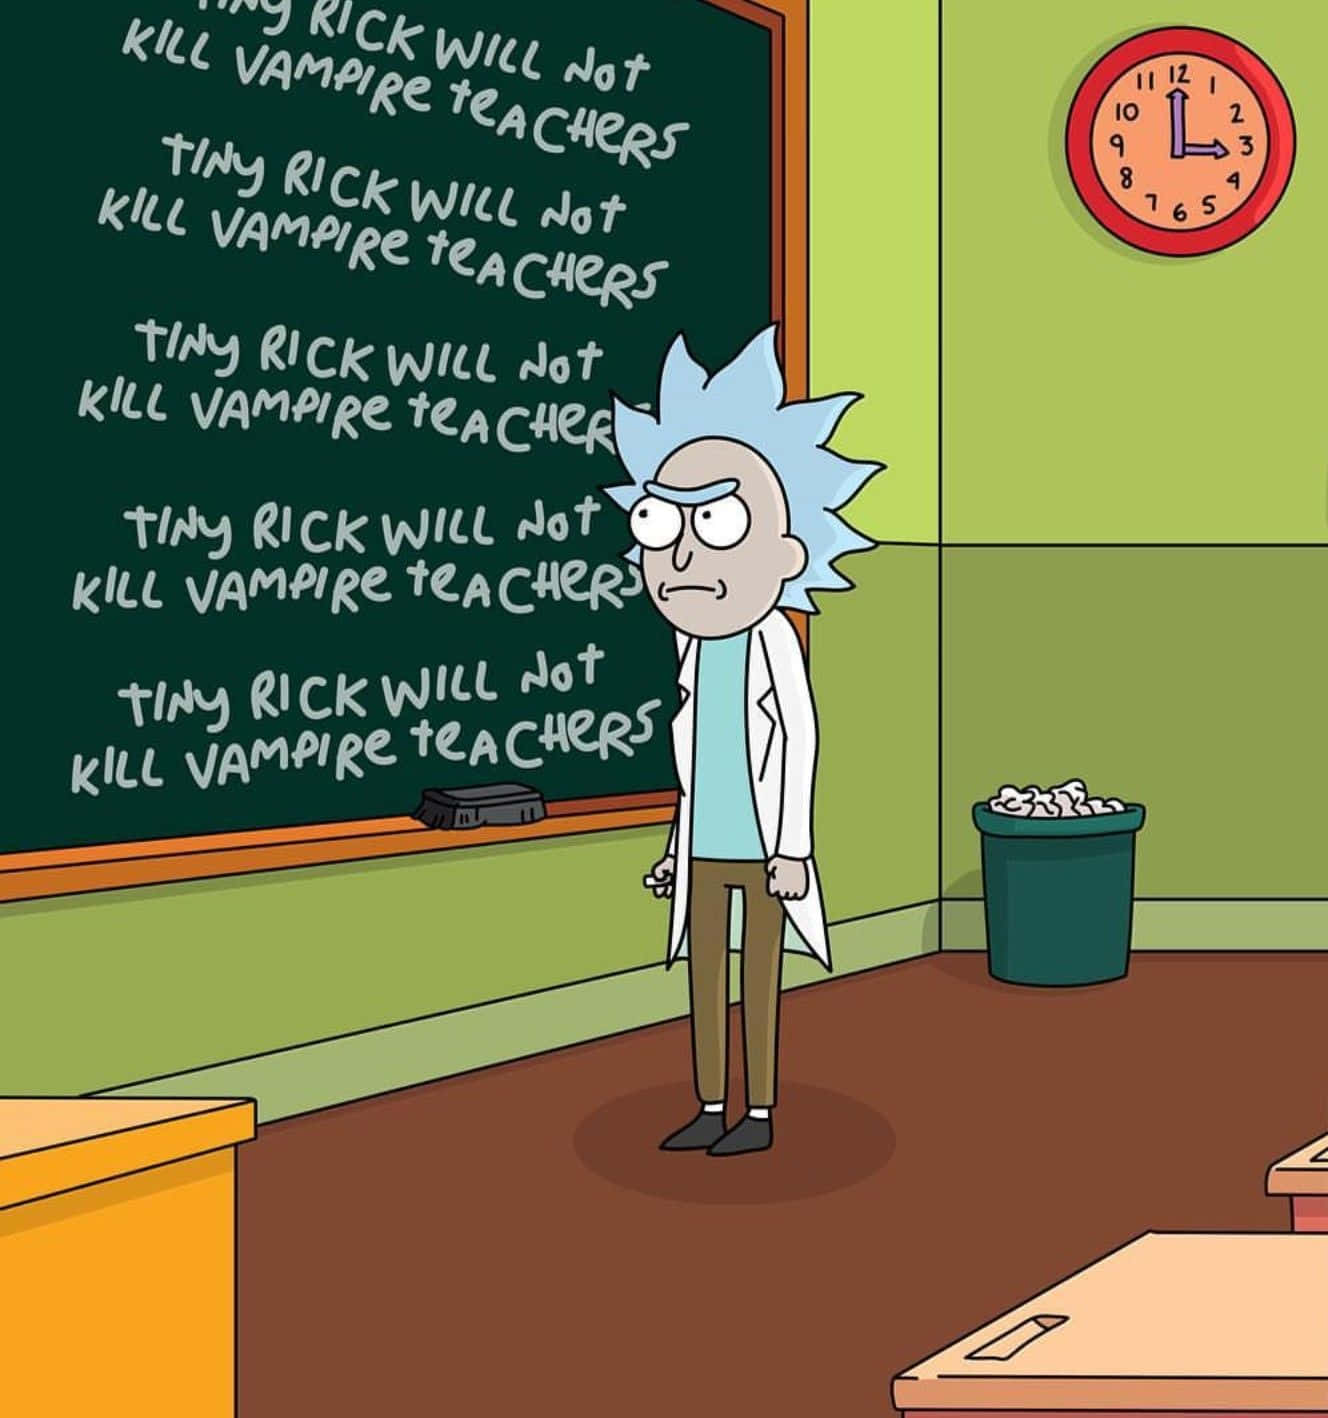 Members of the Council of Ricks, the governing body in the interdimensional universe of Rick and Morty Wallpaper